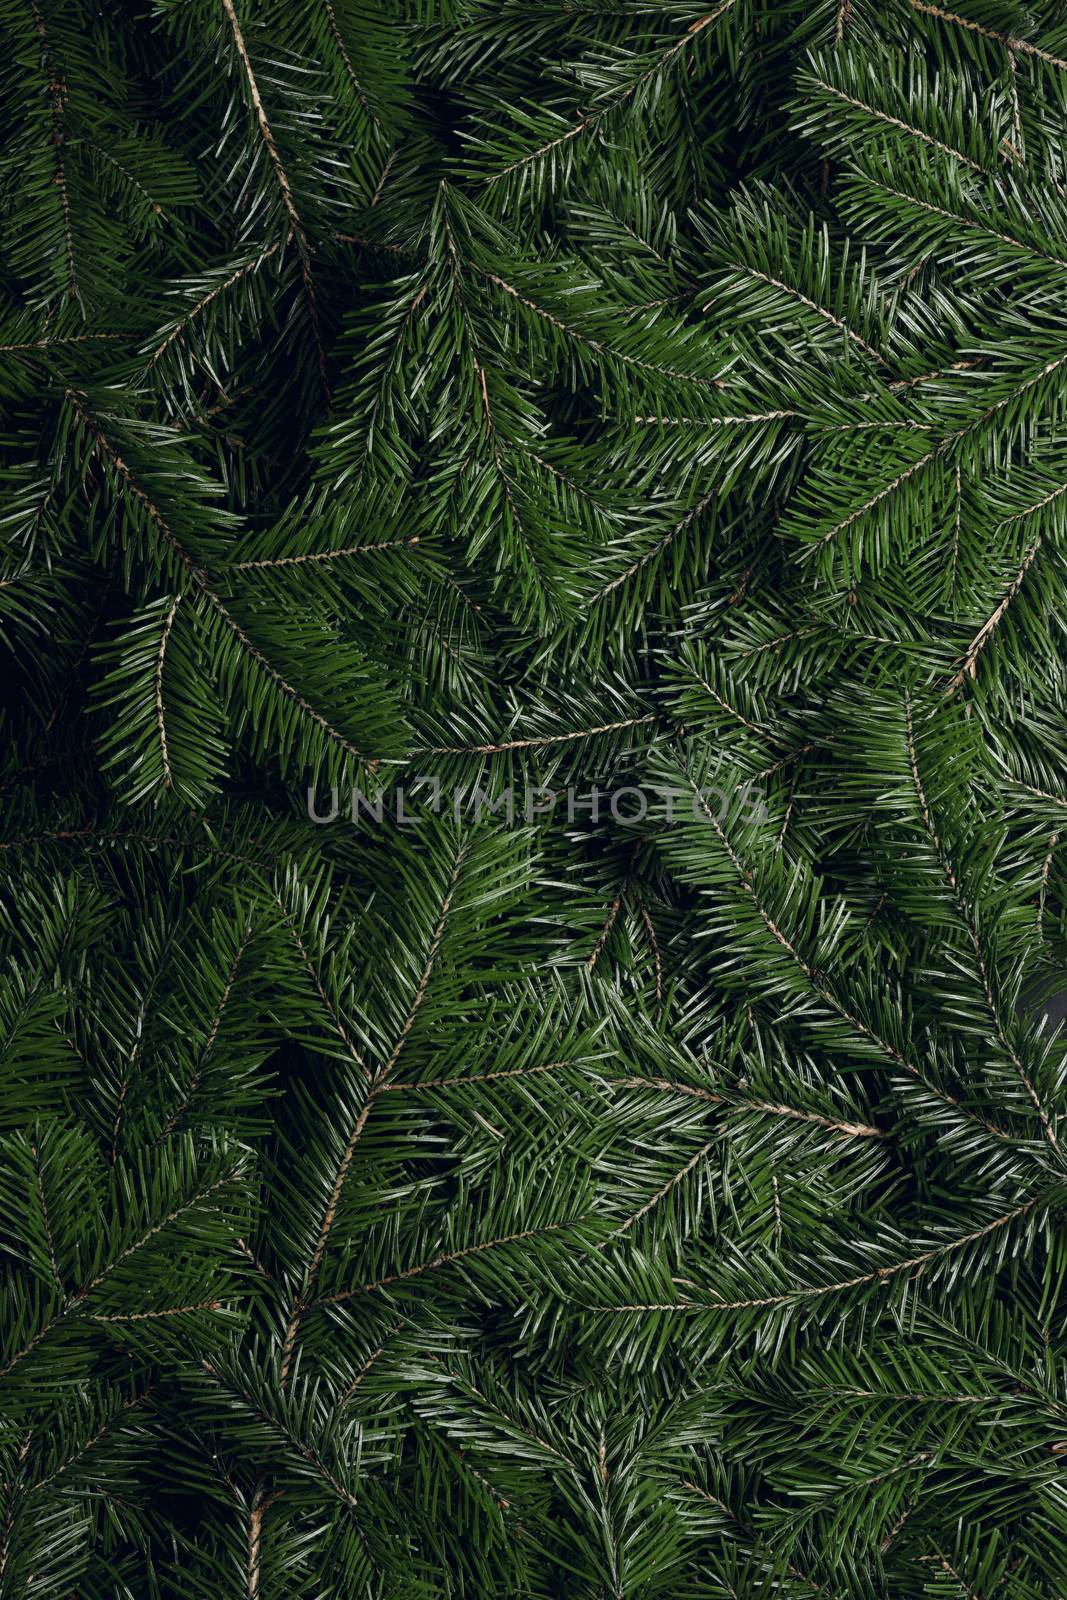 Background of green fir branches for Christmas New Year celebration greeting card design